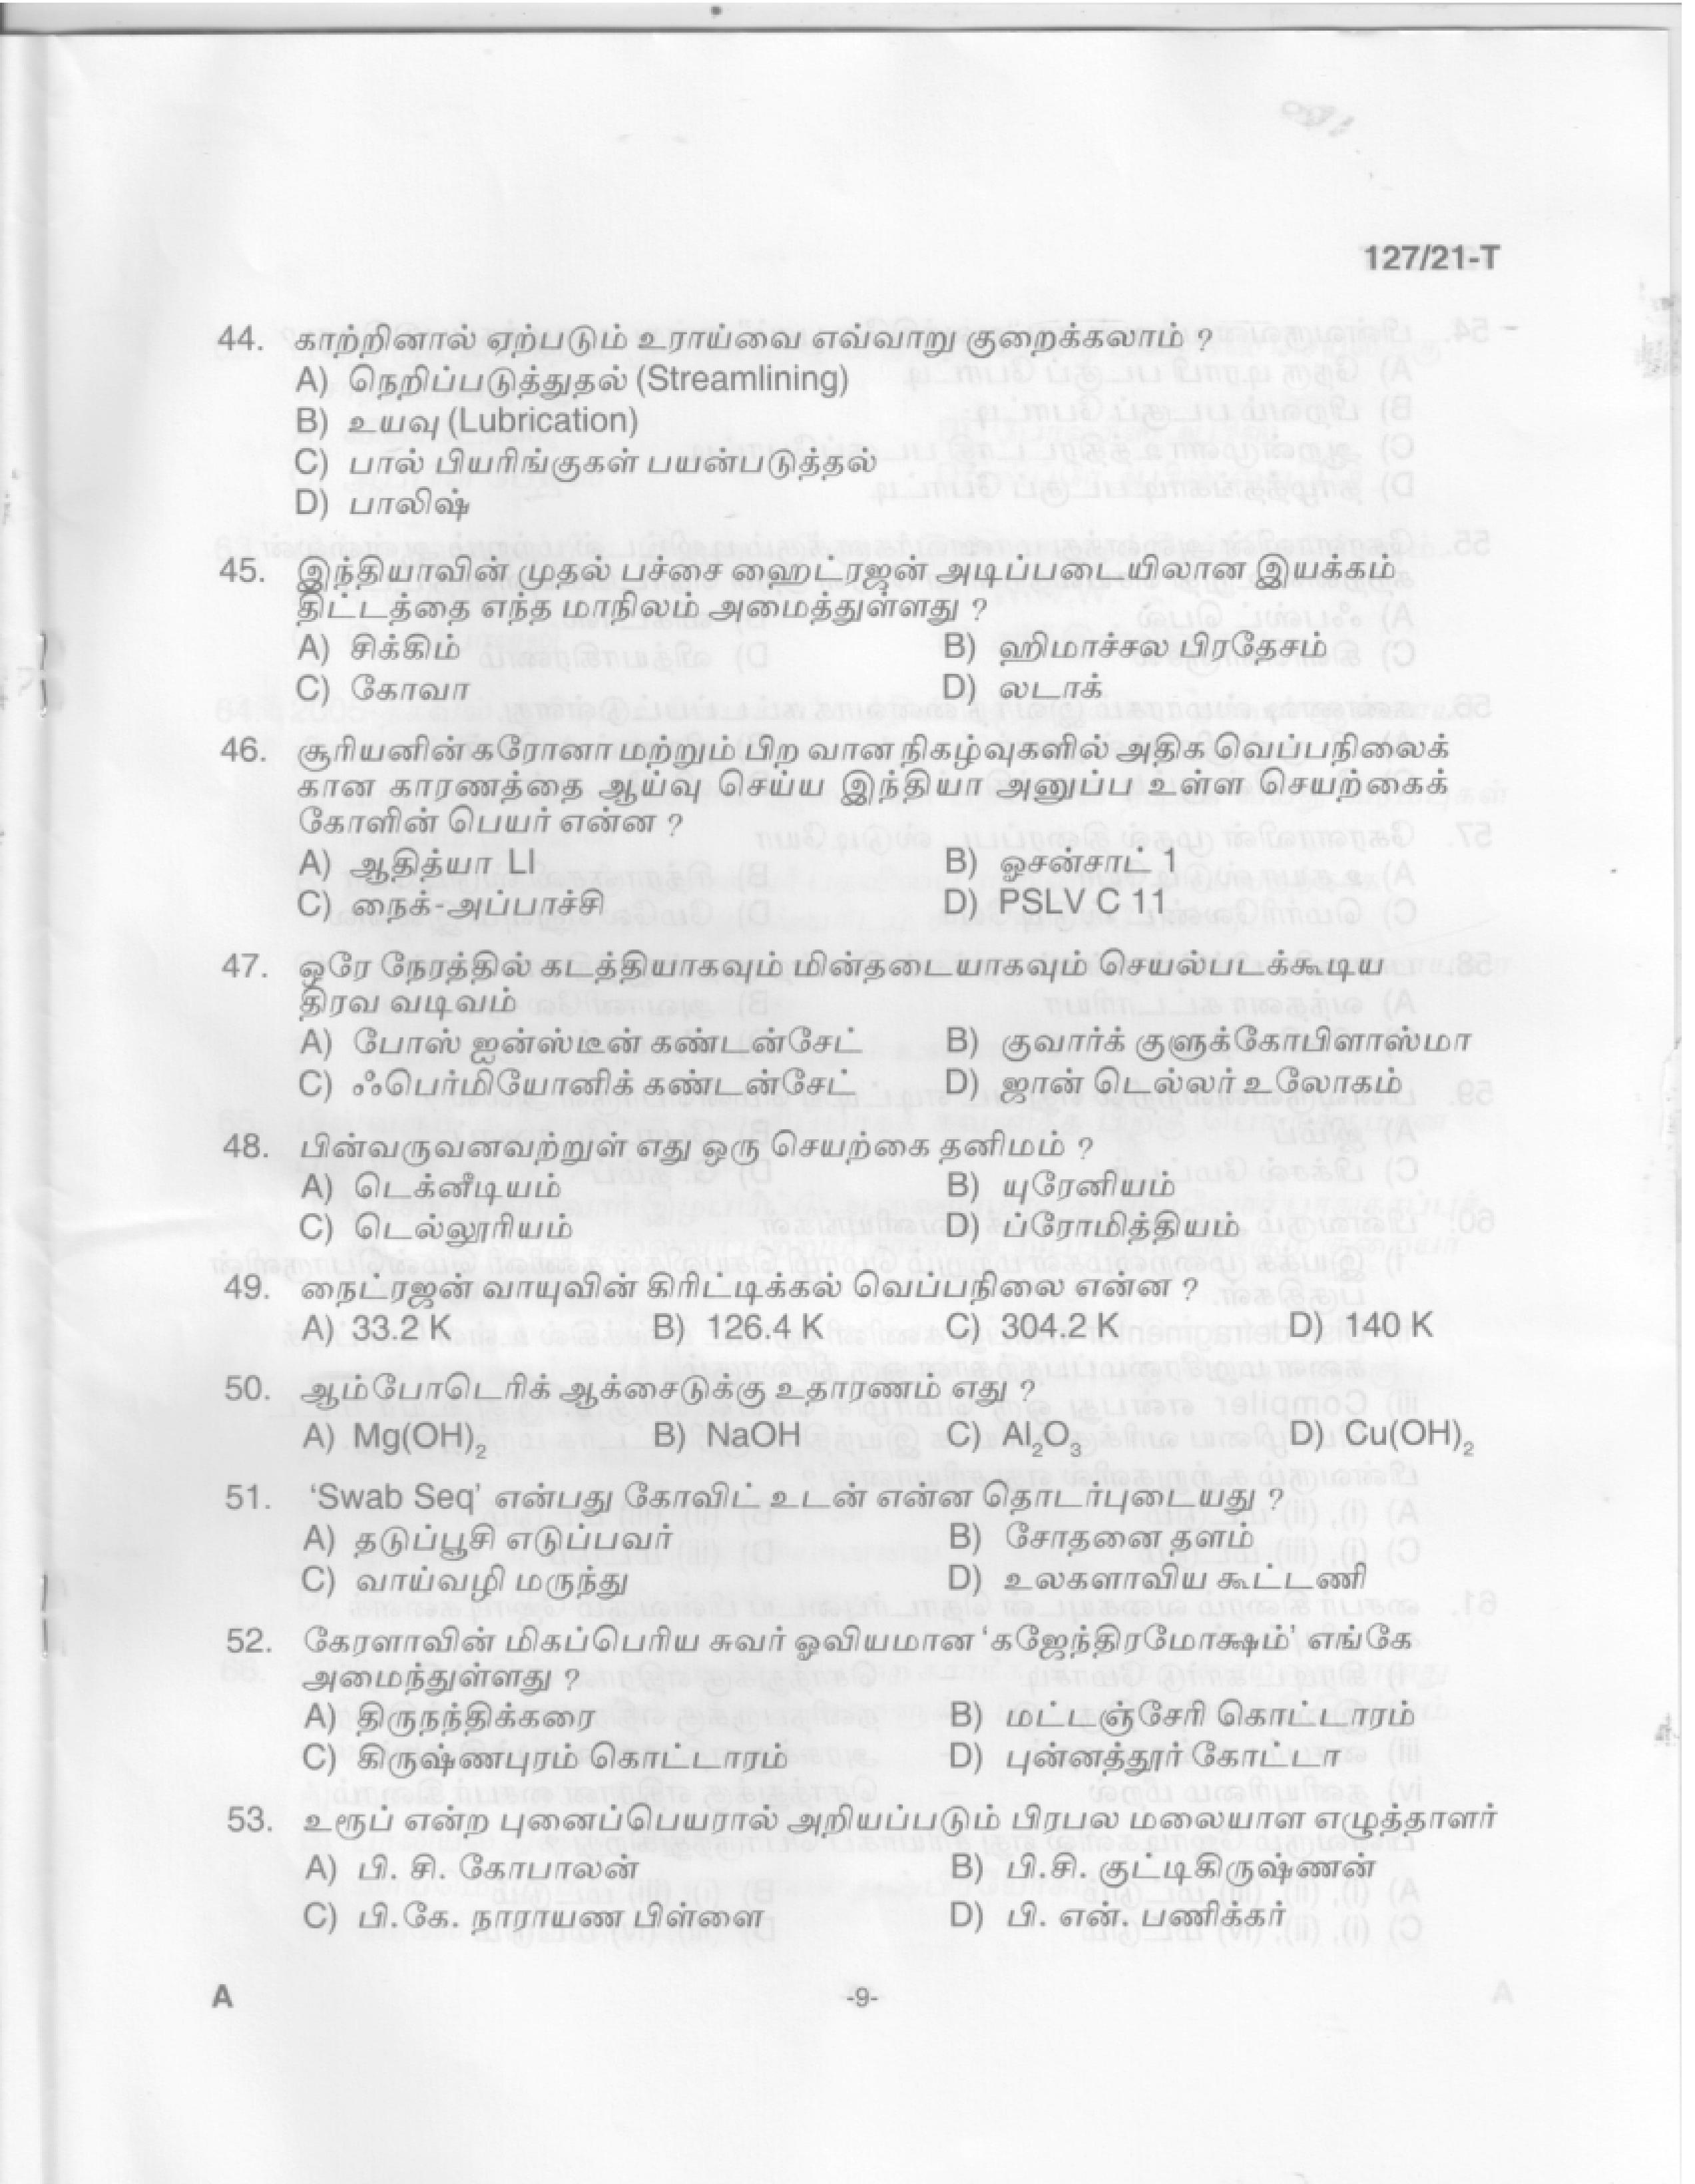 Office Attendant and Laboratory Attender Tamil Exam 2021 Code 1272021 7